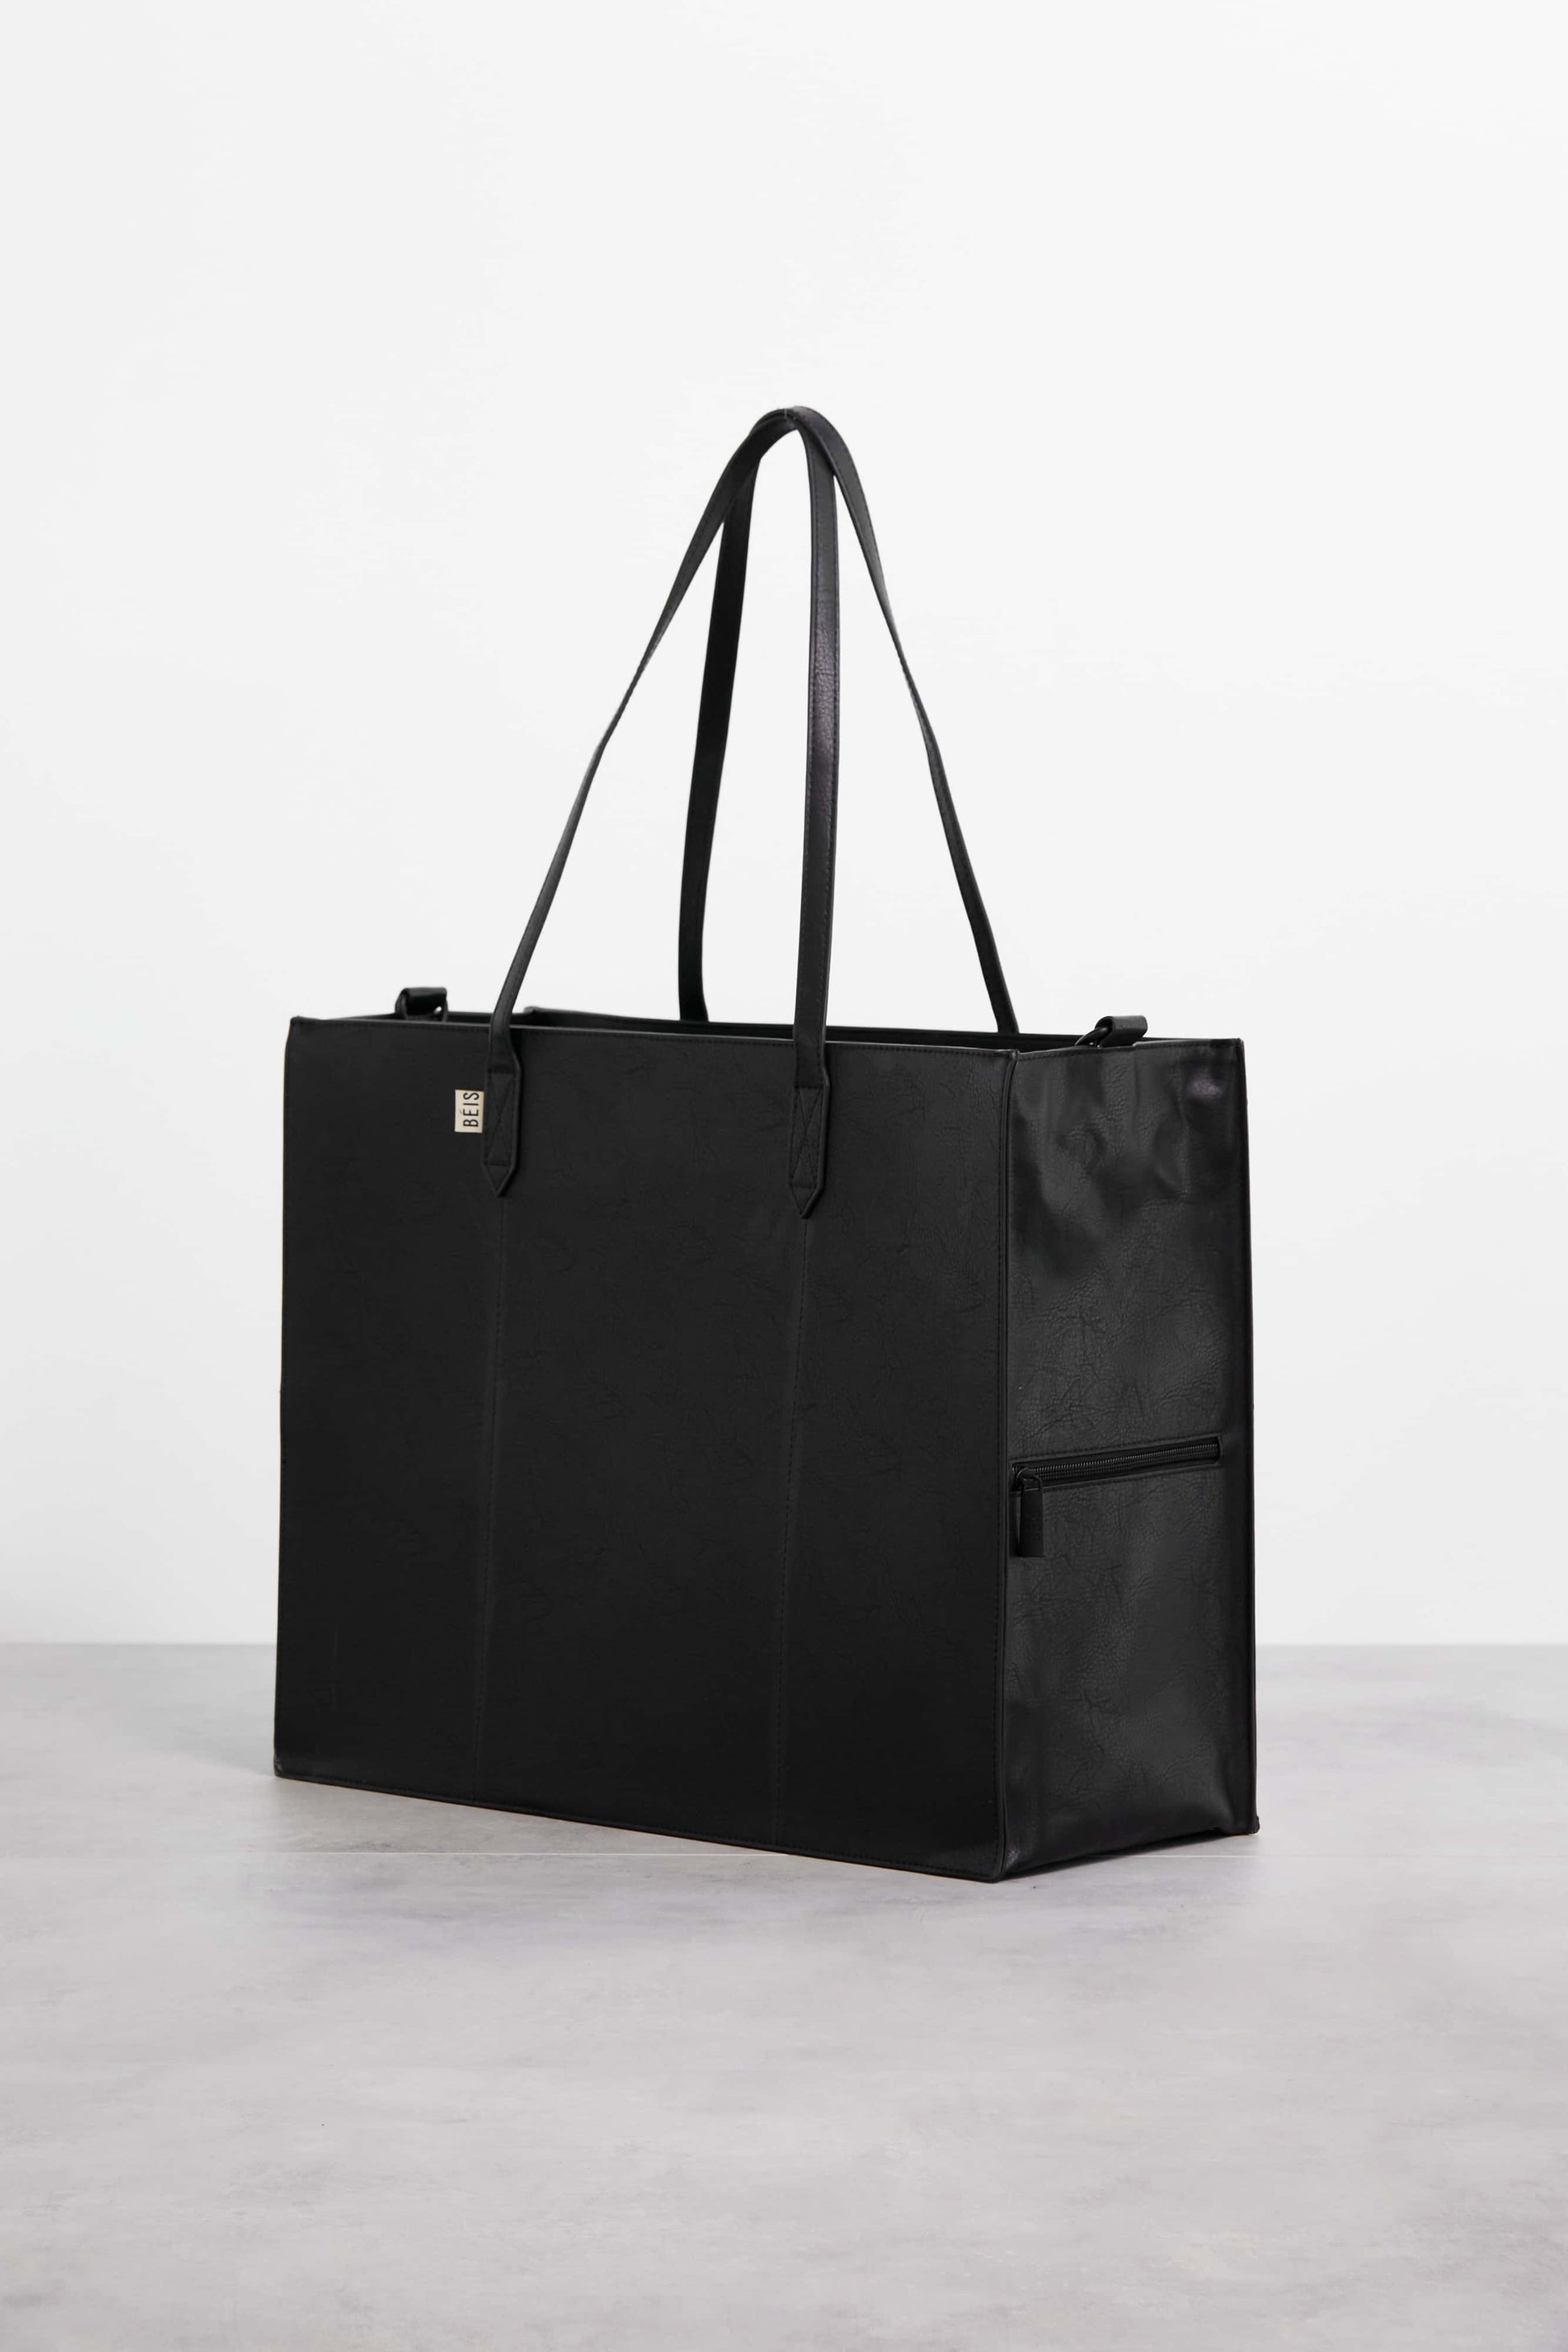 Work Tote Black Front and Side Angle